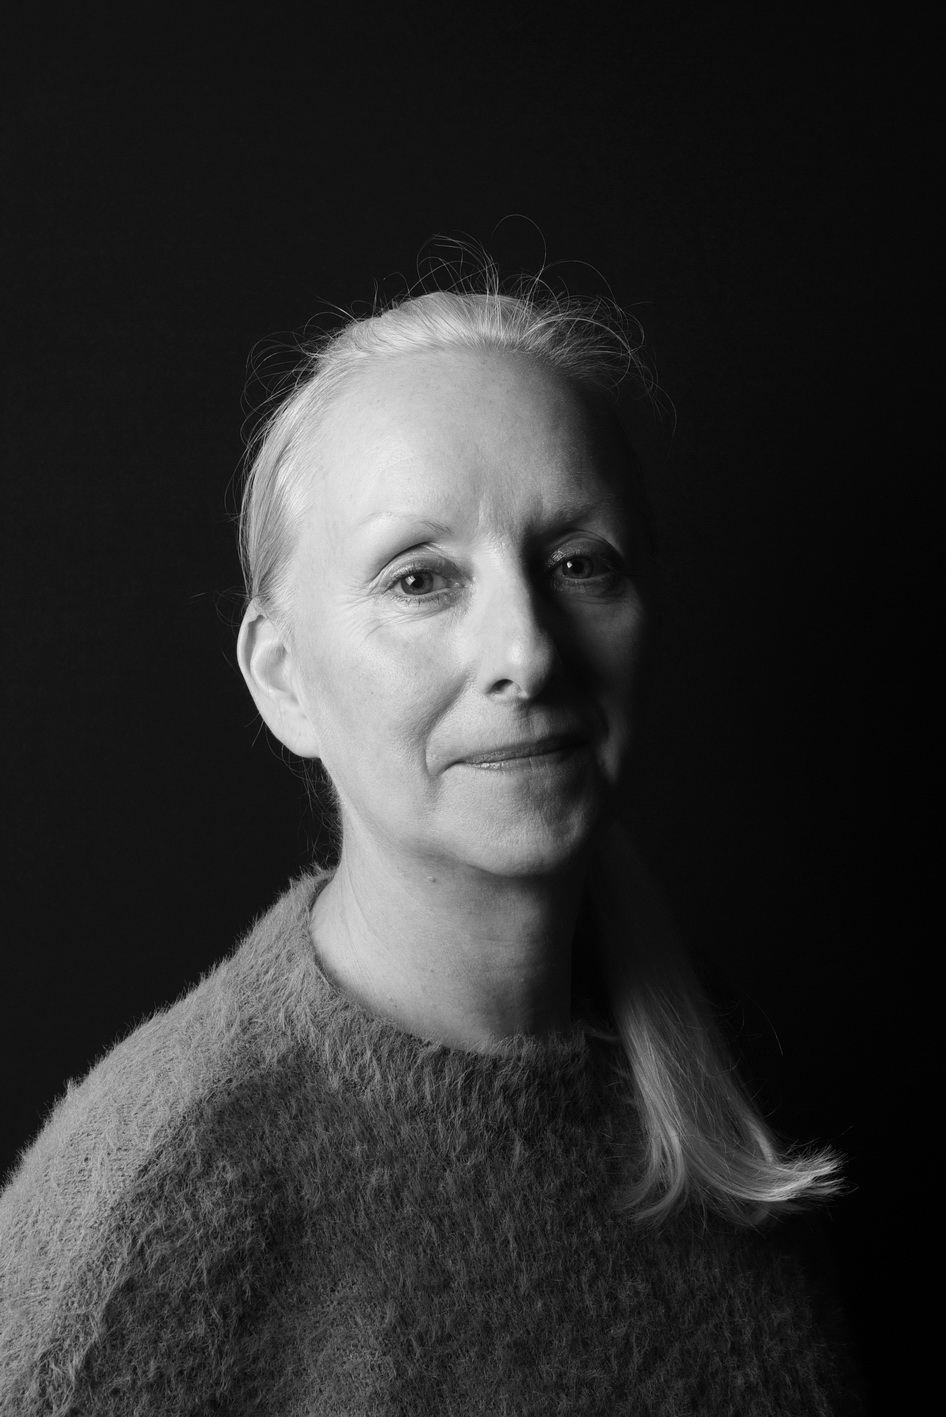 Photograph of Liverpool therapist Fiona Wilkie